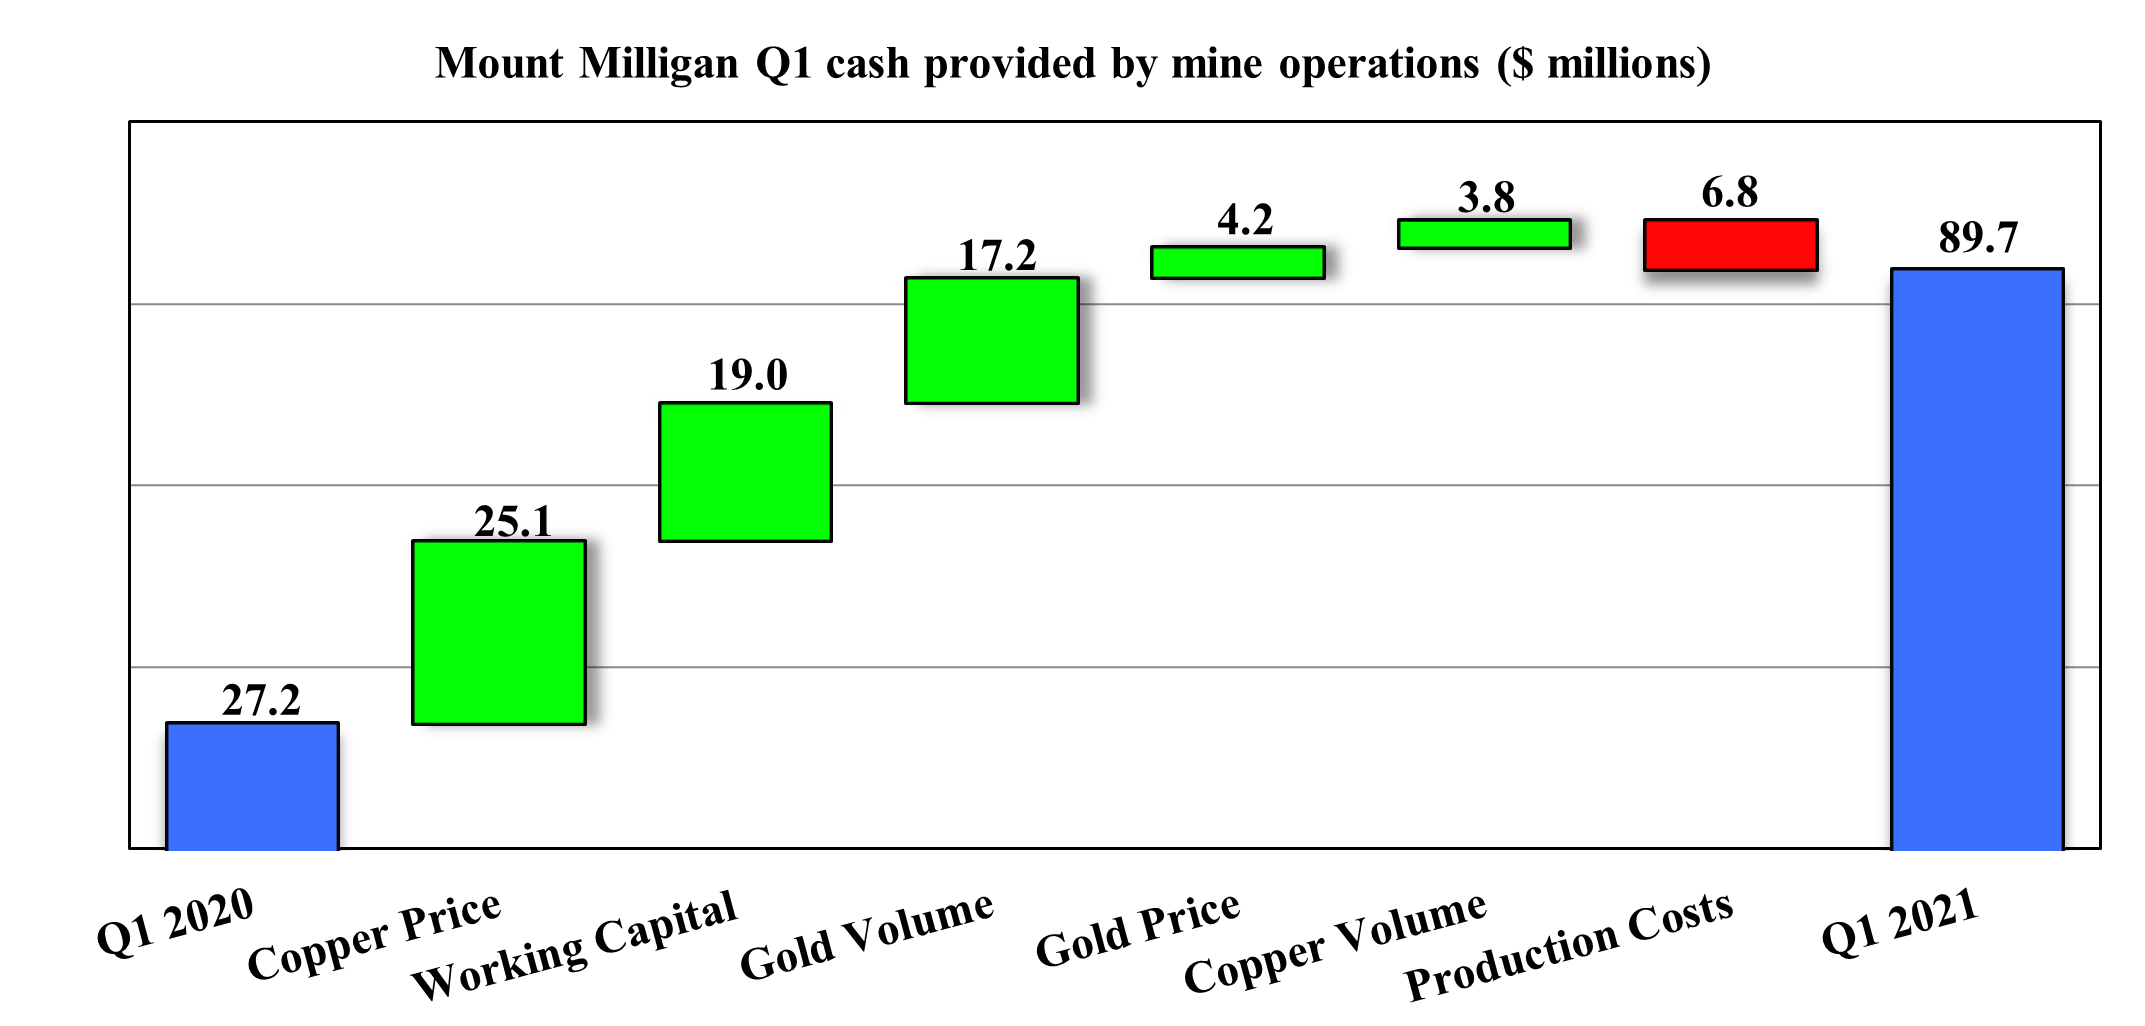 Mount Milligan Q1 cash provided by mine operations ($ millions)